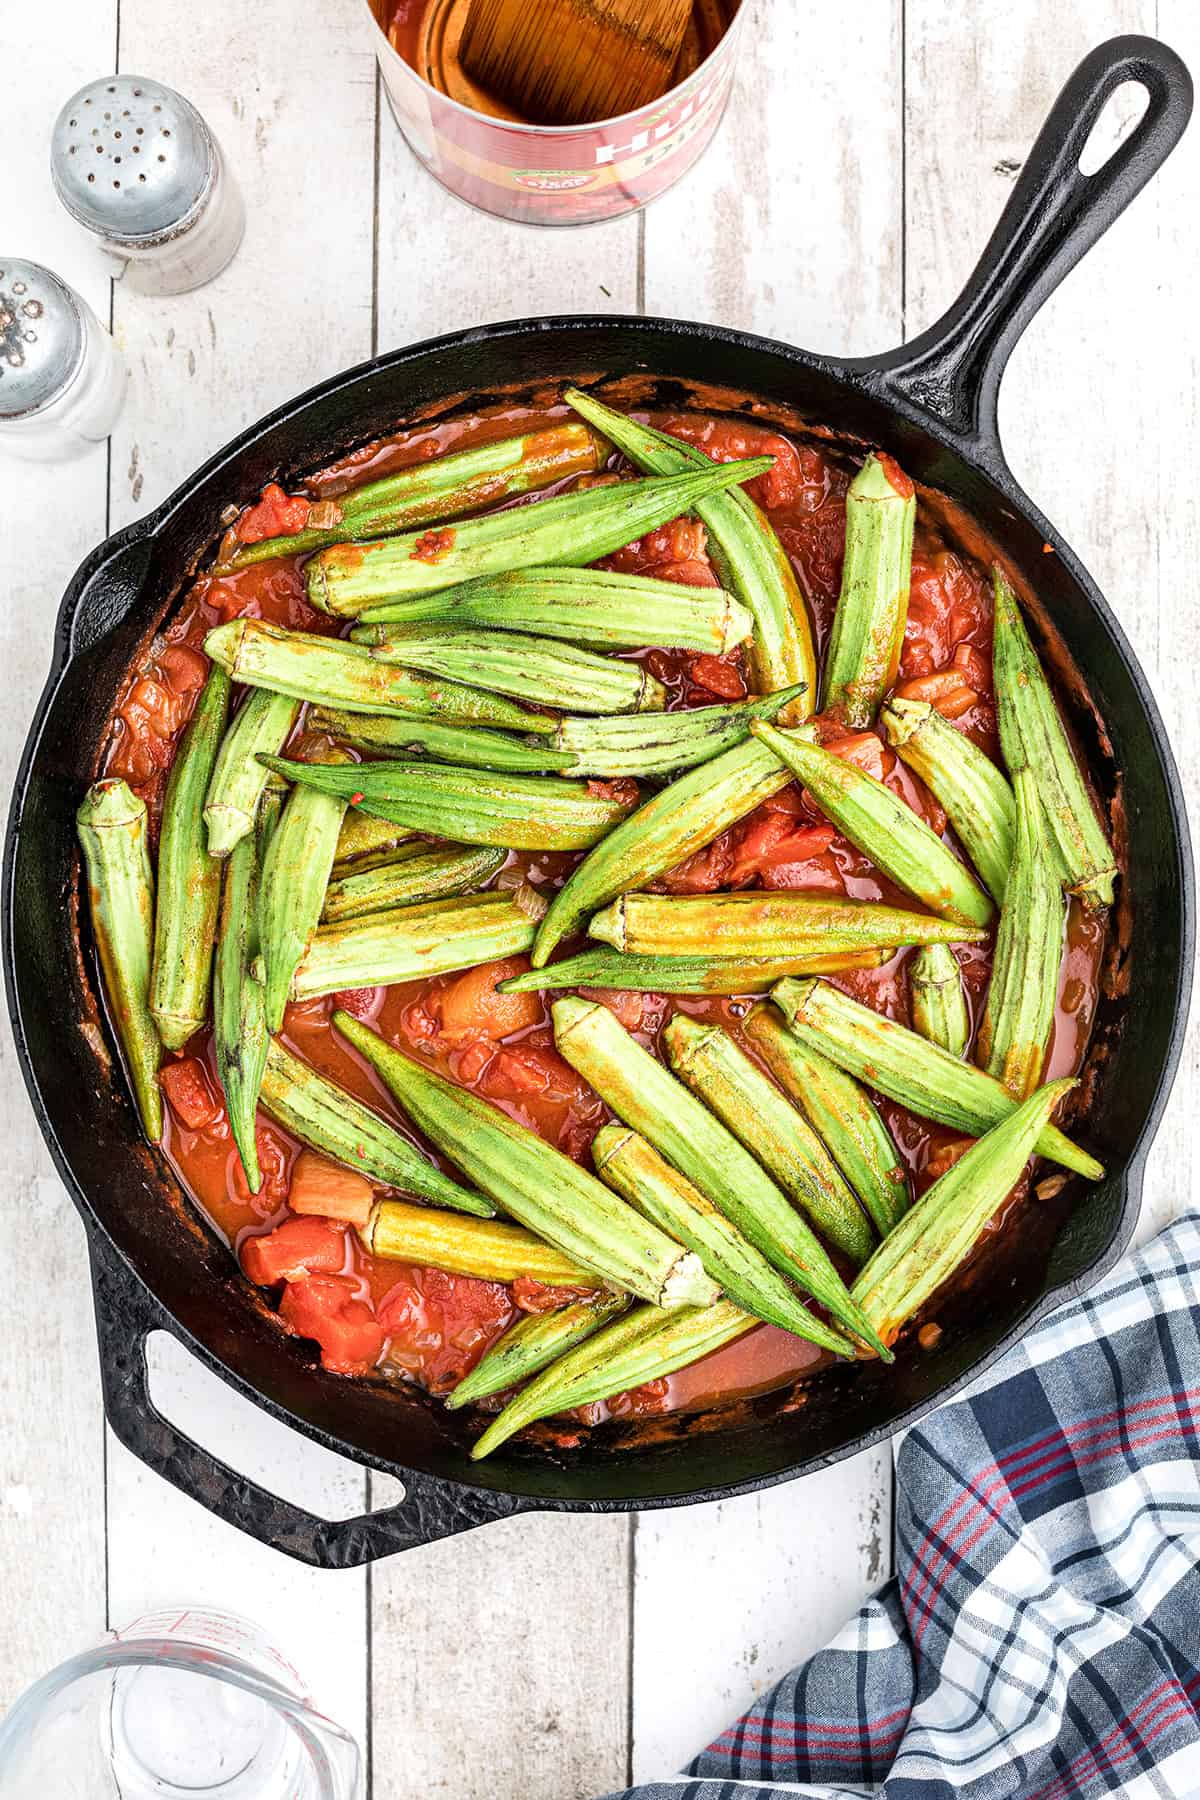 Okra added to tomatoes and onions in the skillet.